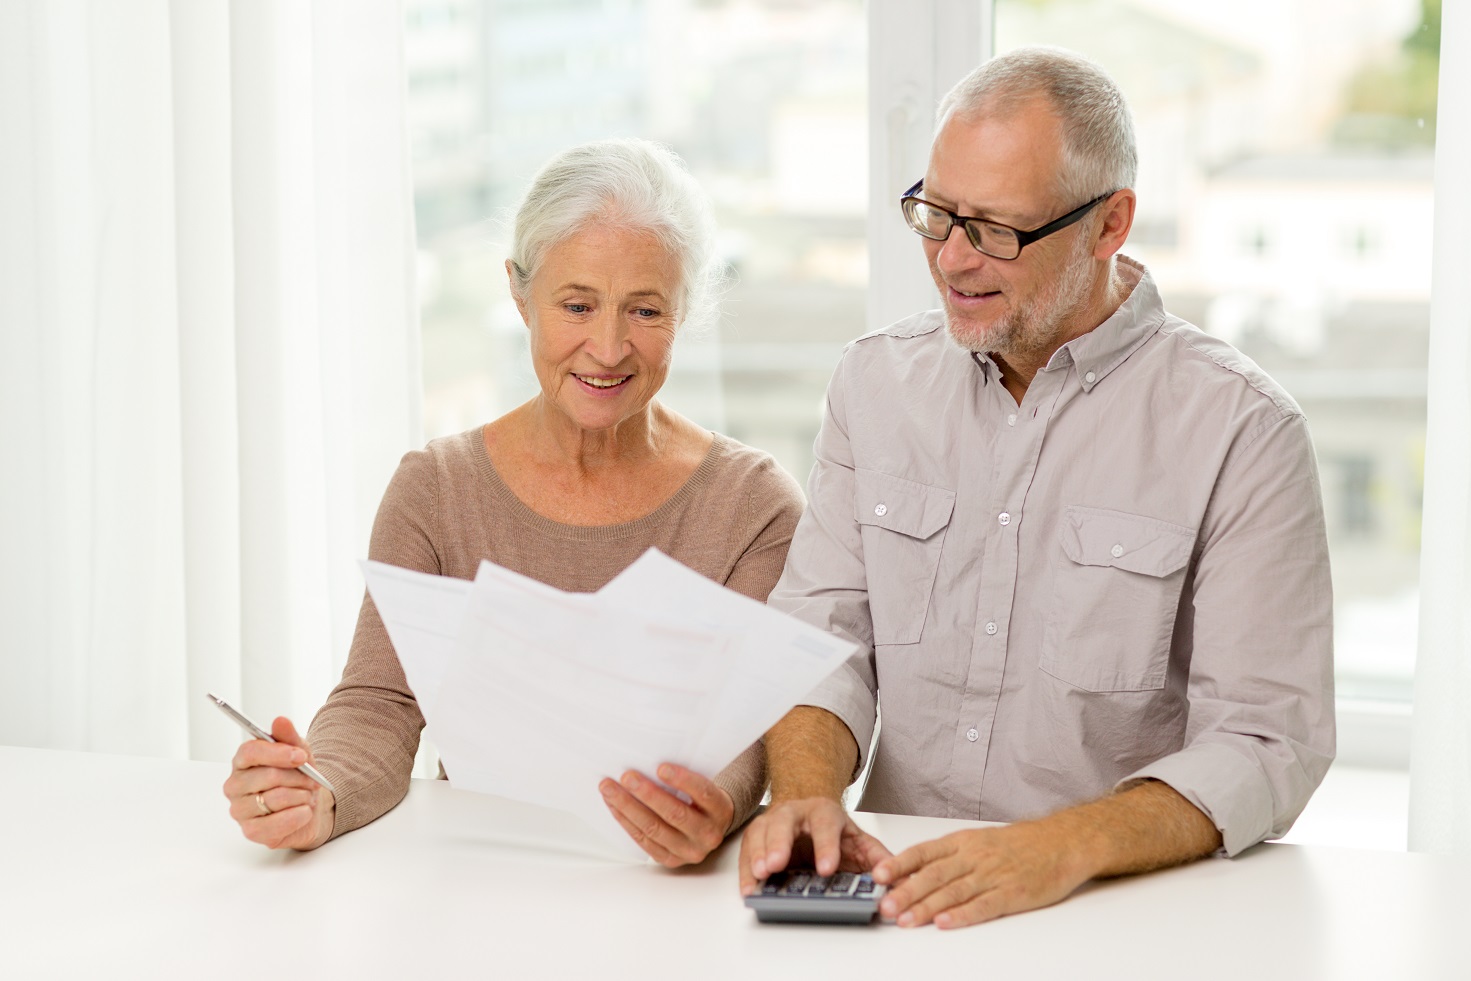 THE RETIREE'S GUIDE TO PLANNING TAX STRATEGIES